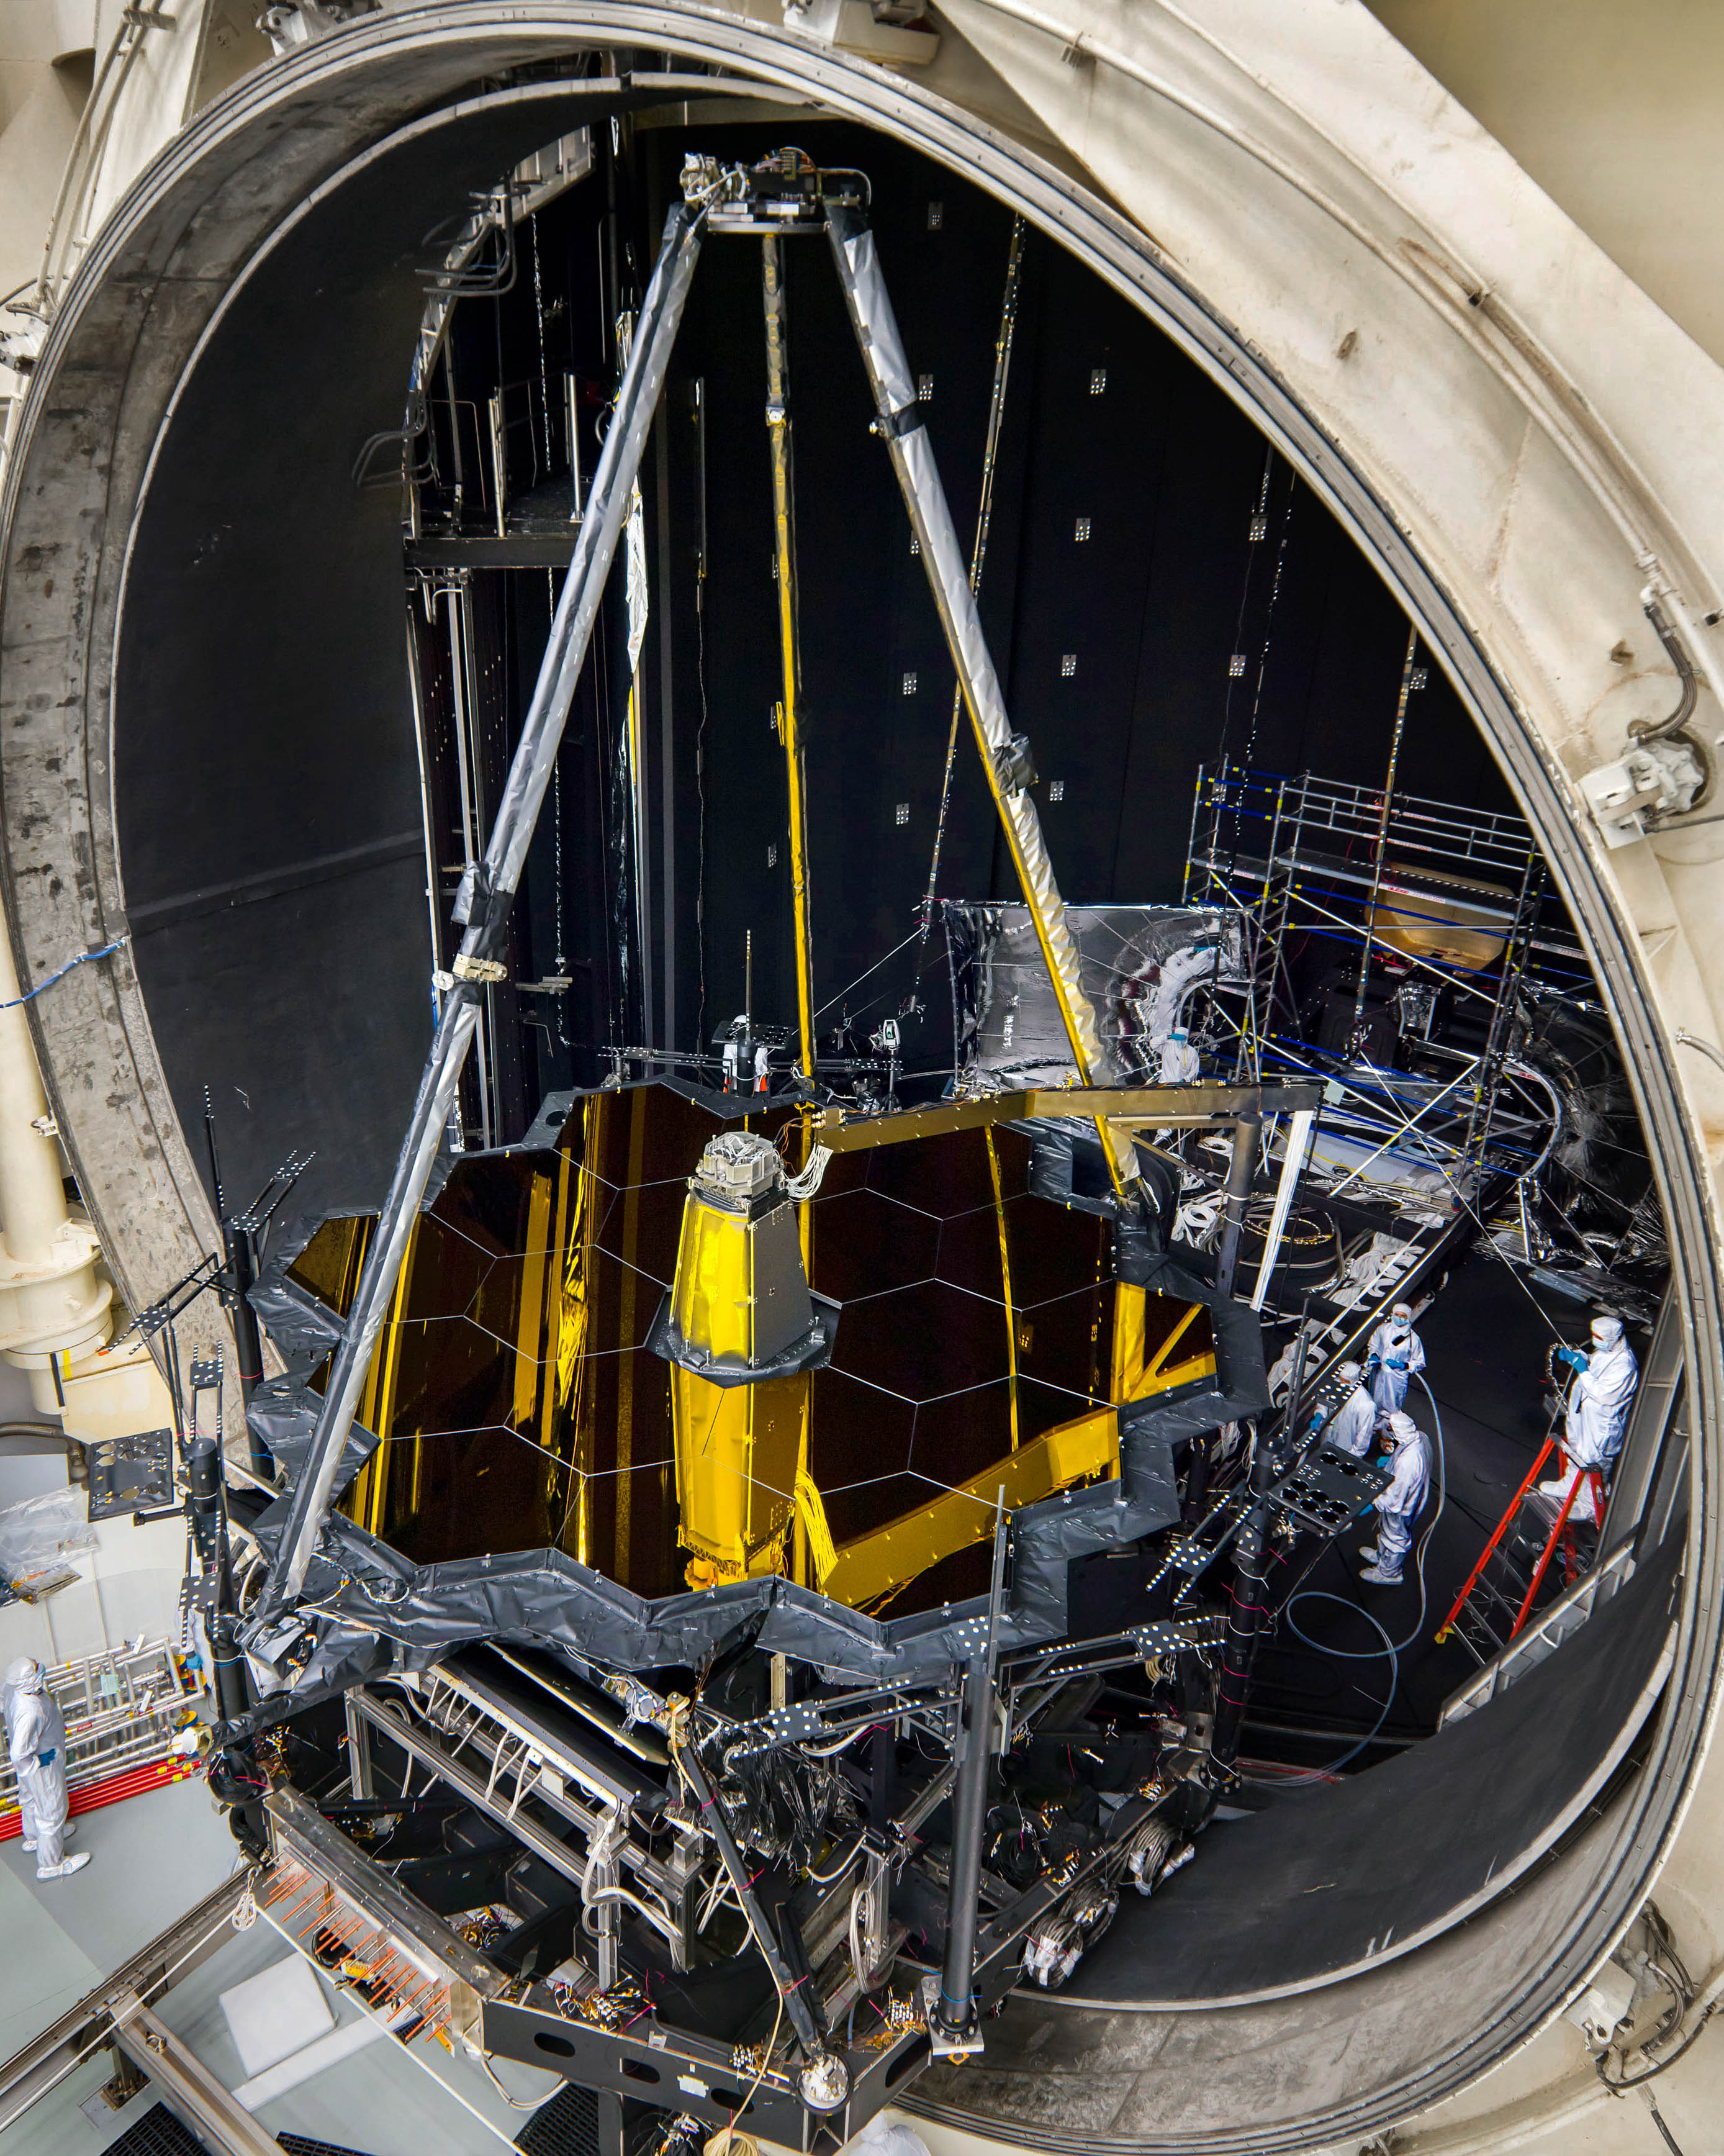 The Webb telescope enters the giant Chamber A thermal vacuum chamber at NASA Johnson. At this point, Webb consists of mirrors and instruments but has not yet been mated with the sunshield or spacecraft bus. Webb is on its back, golden hexagonal mirrors face up. The secondary mirror support structure is extended like a tripod above the primary mirrors. The telescope lies on black and silver support equipment. It is half in the giant mouth of the cavernous test chamber. The chamber is filled with test equipment and people in cleanroom suits. One of them stands on top of a red ladder.